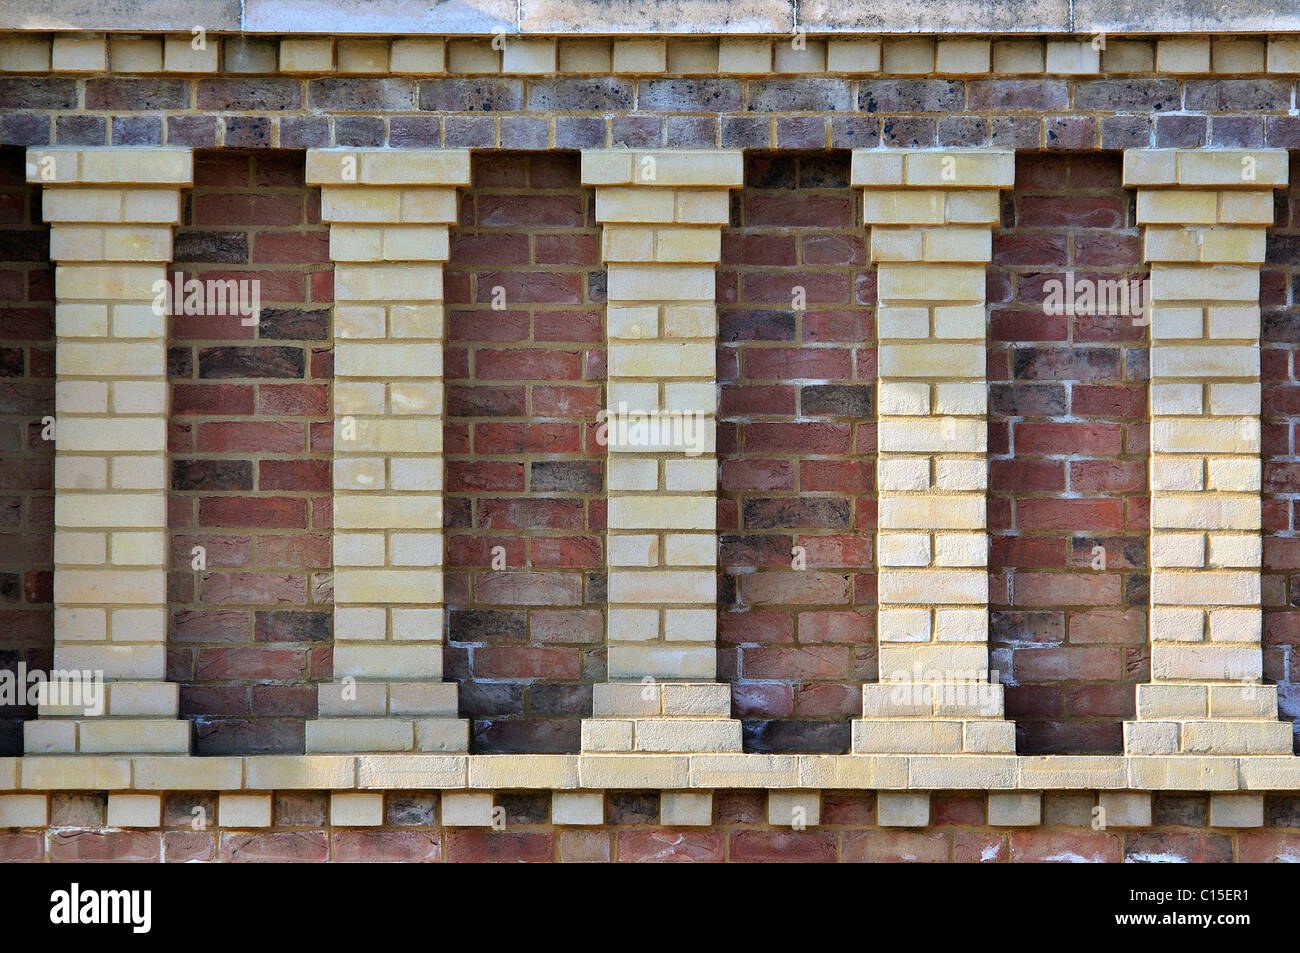 Brickwork detail at the newly constructed village of Poundbury, Dorchester, Dorset, UK. March 2011 Stock Photo